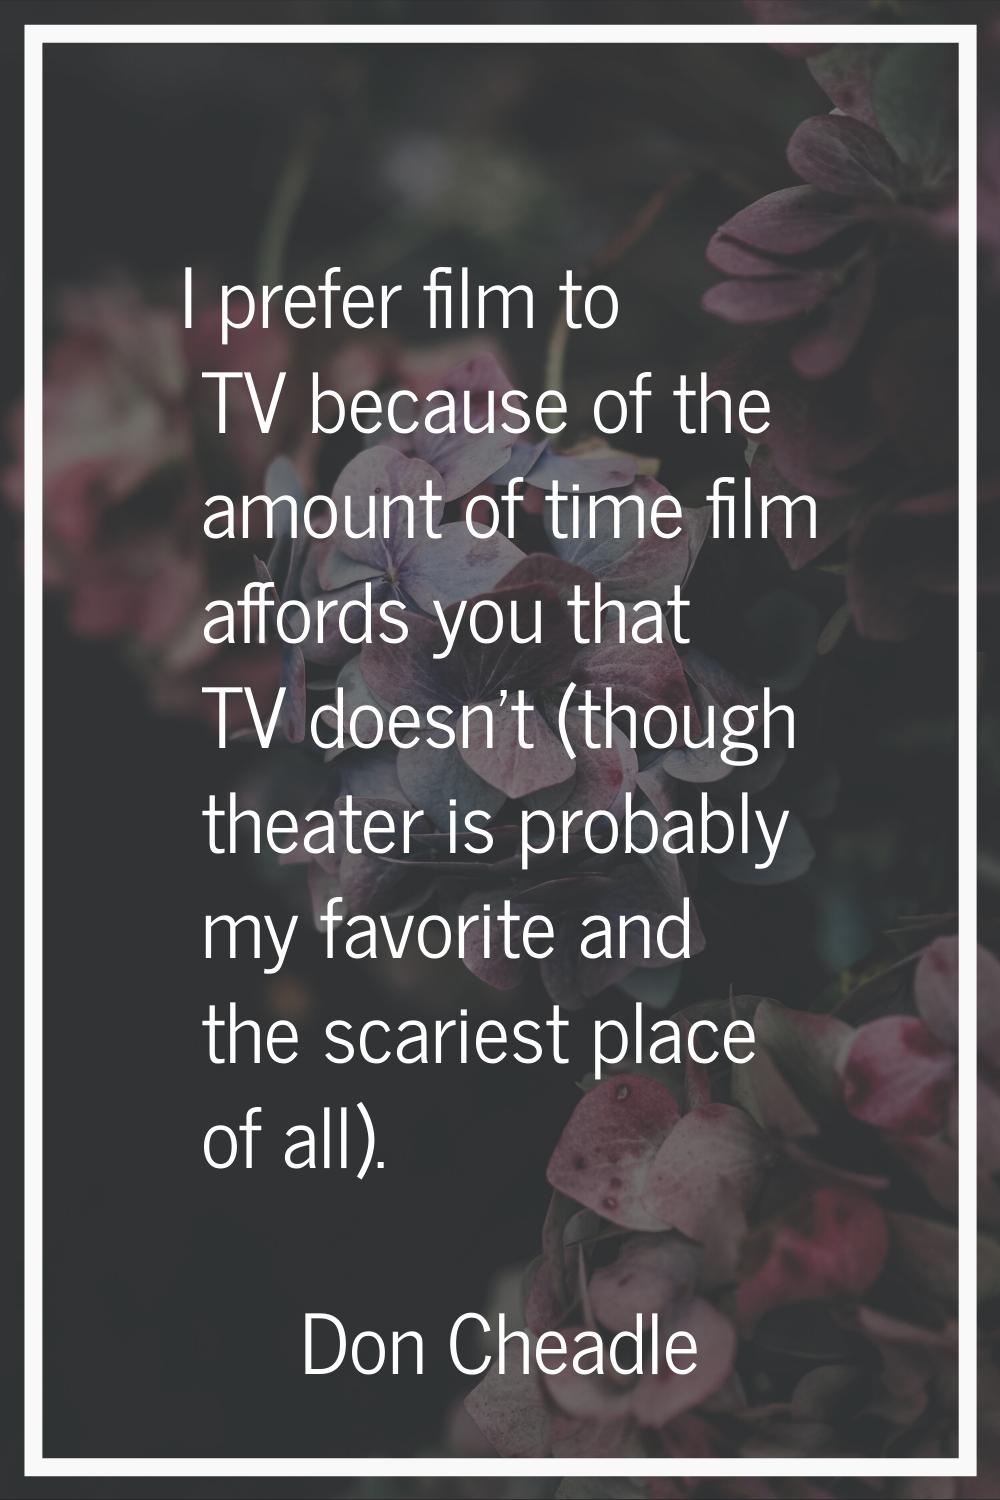 I prefer film to TV because of the amount of time film affords you that TV doesn't (though theater 